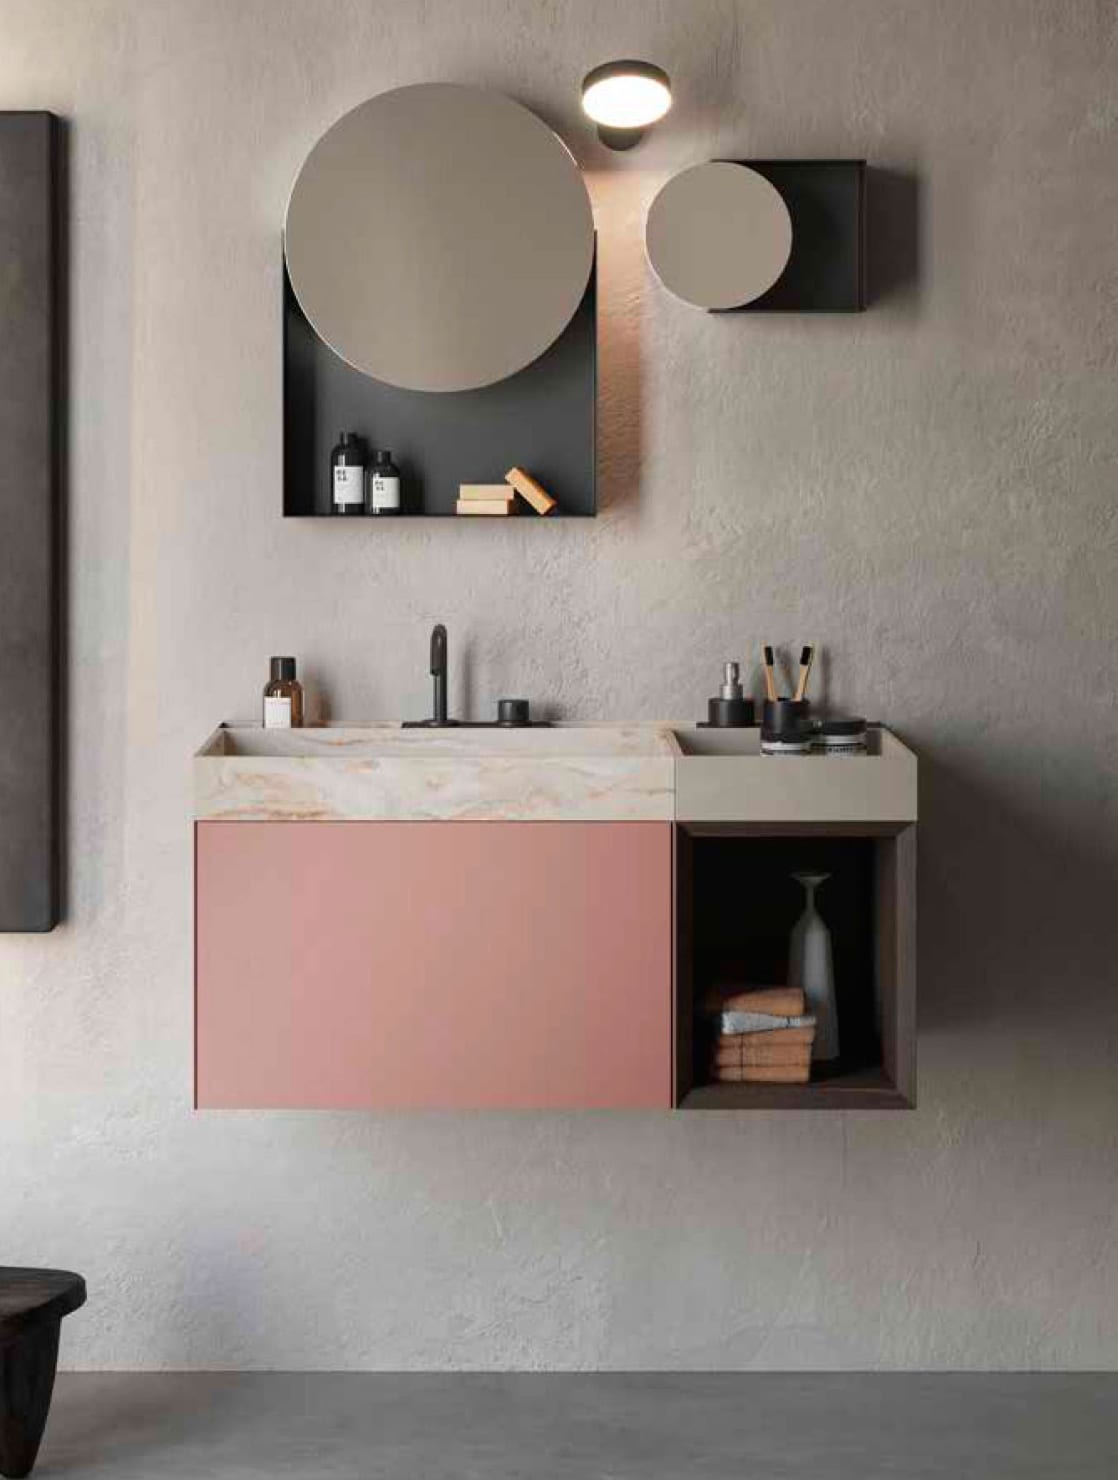 Compact Living is the new Rexa Design collection, a system of furniture, washbasins, mirrors and accessories for small spaces